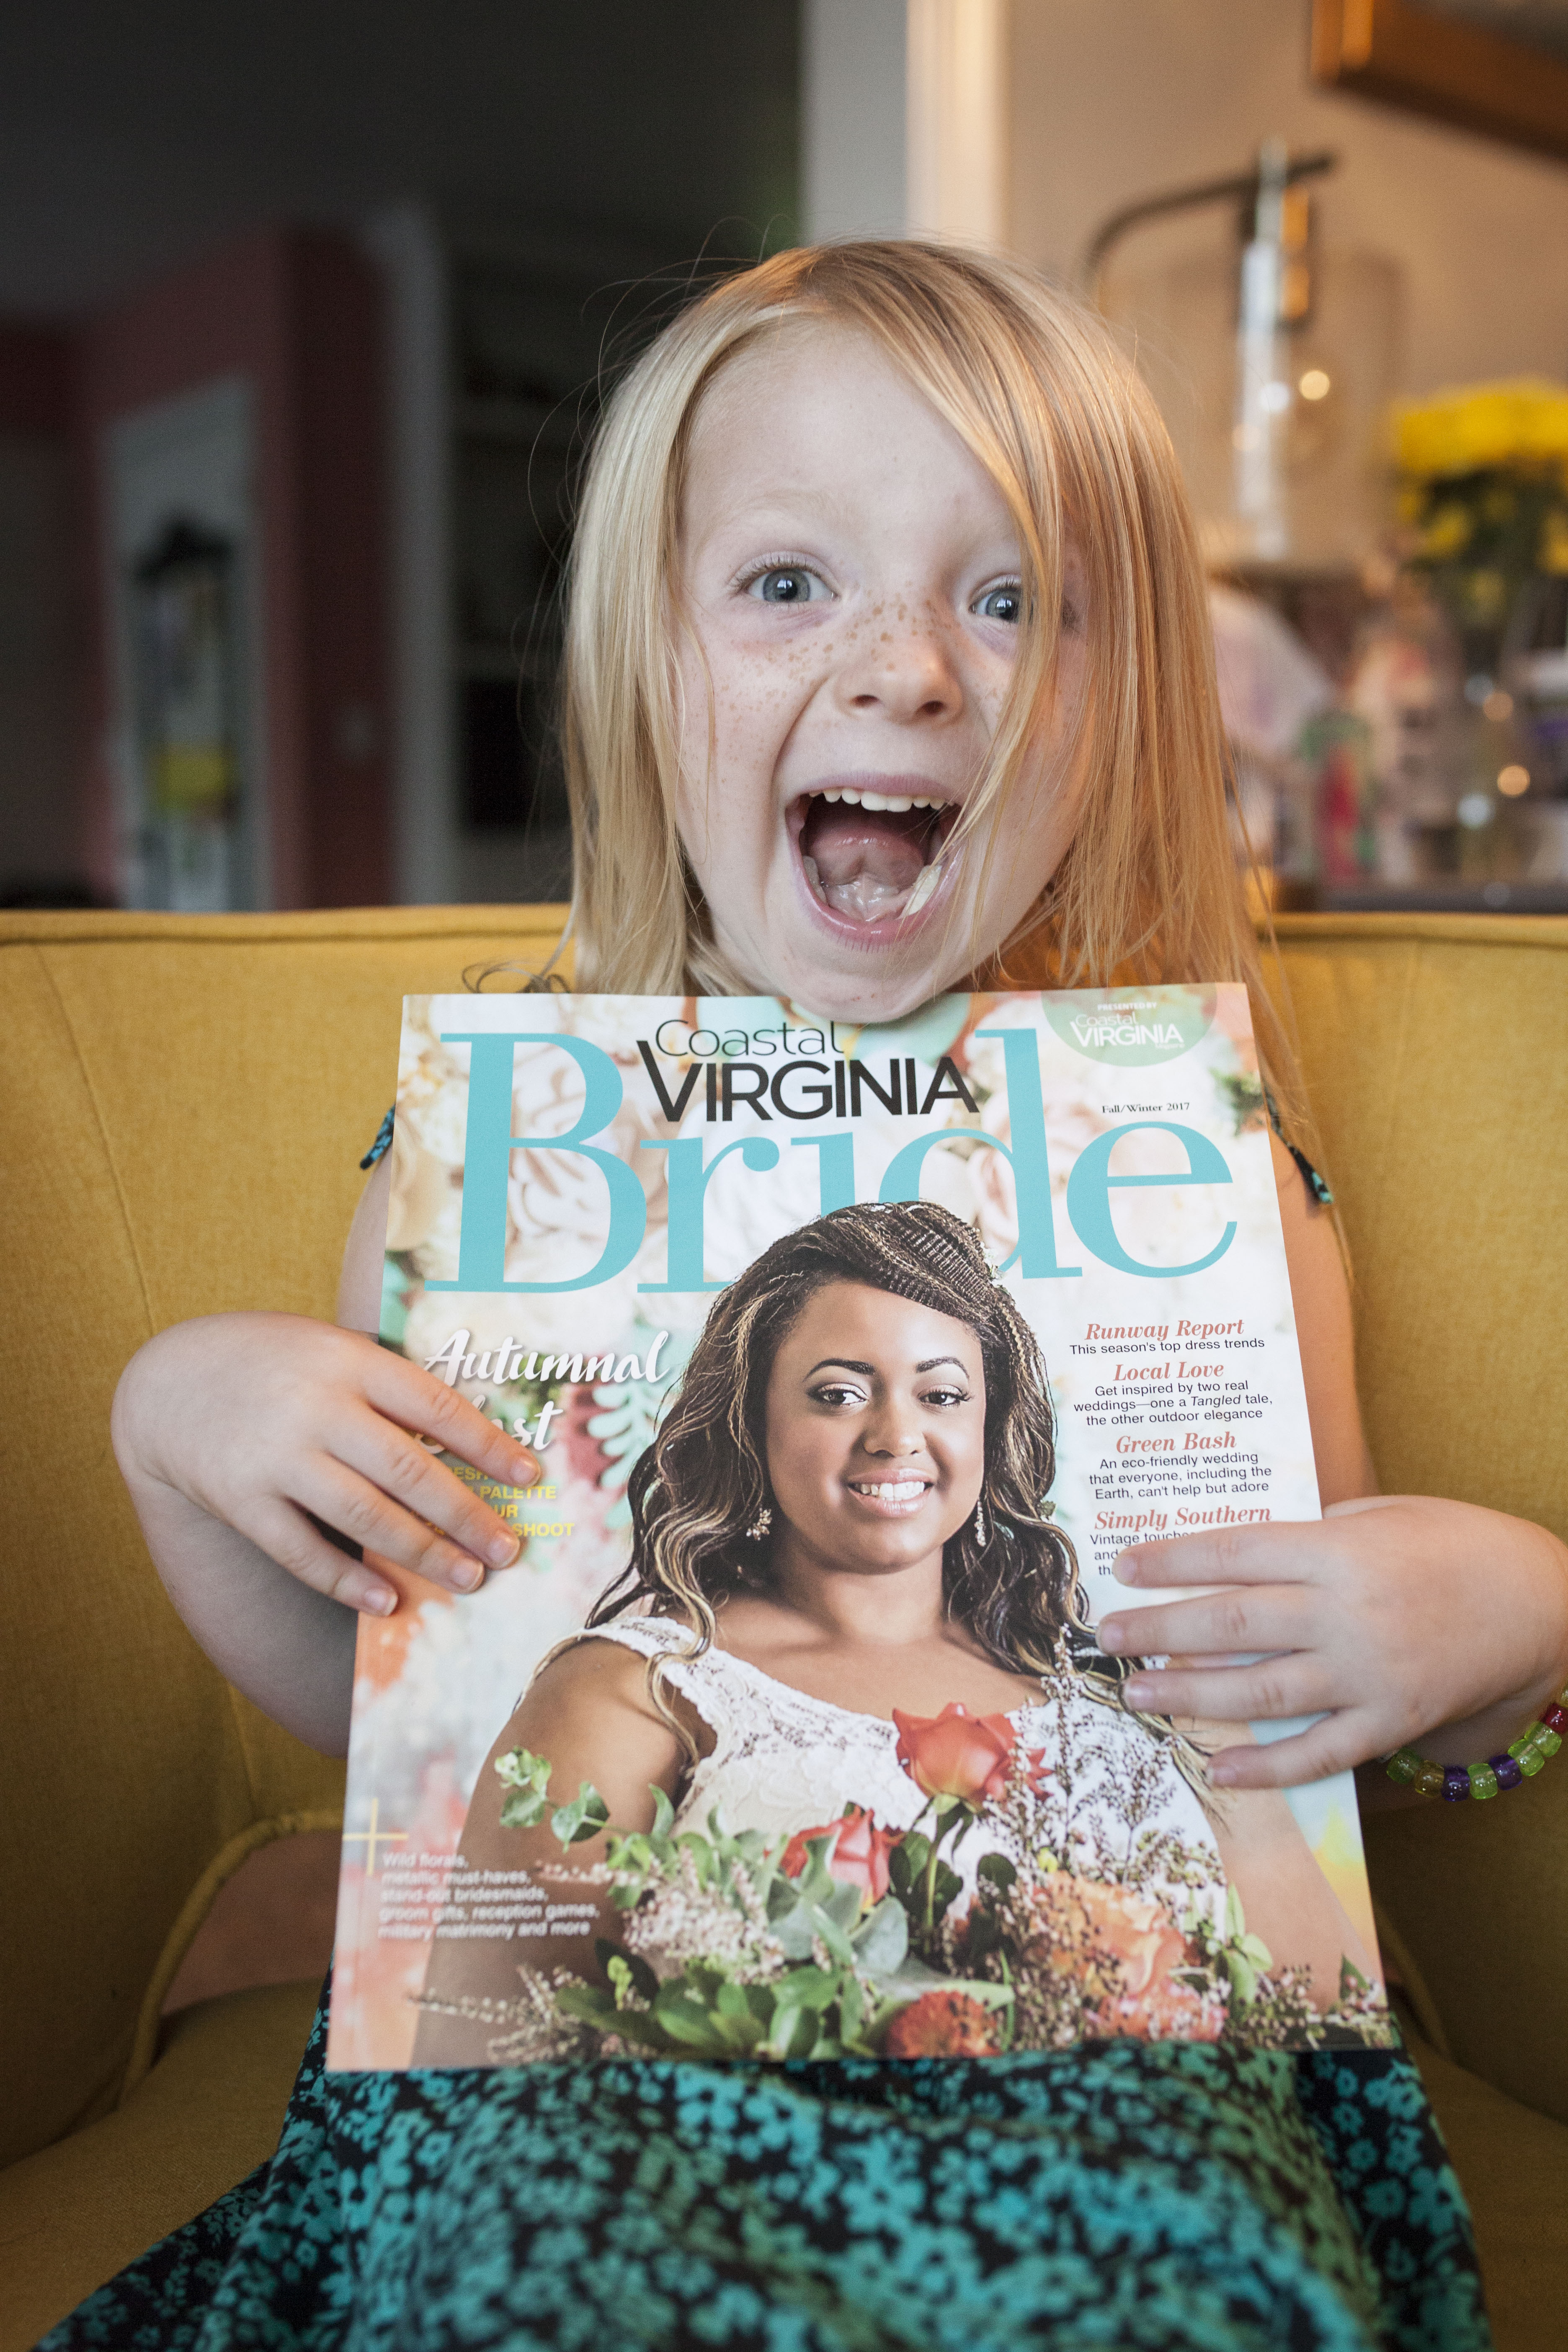 coastal virginia bride, misty saves the day, getting published